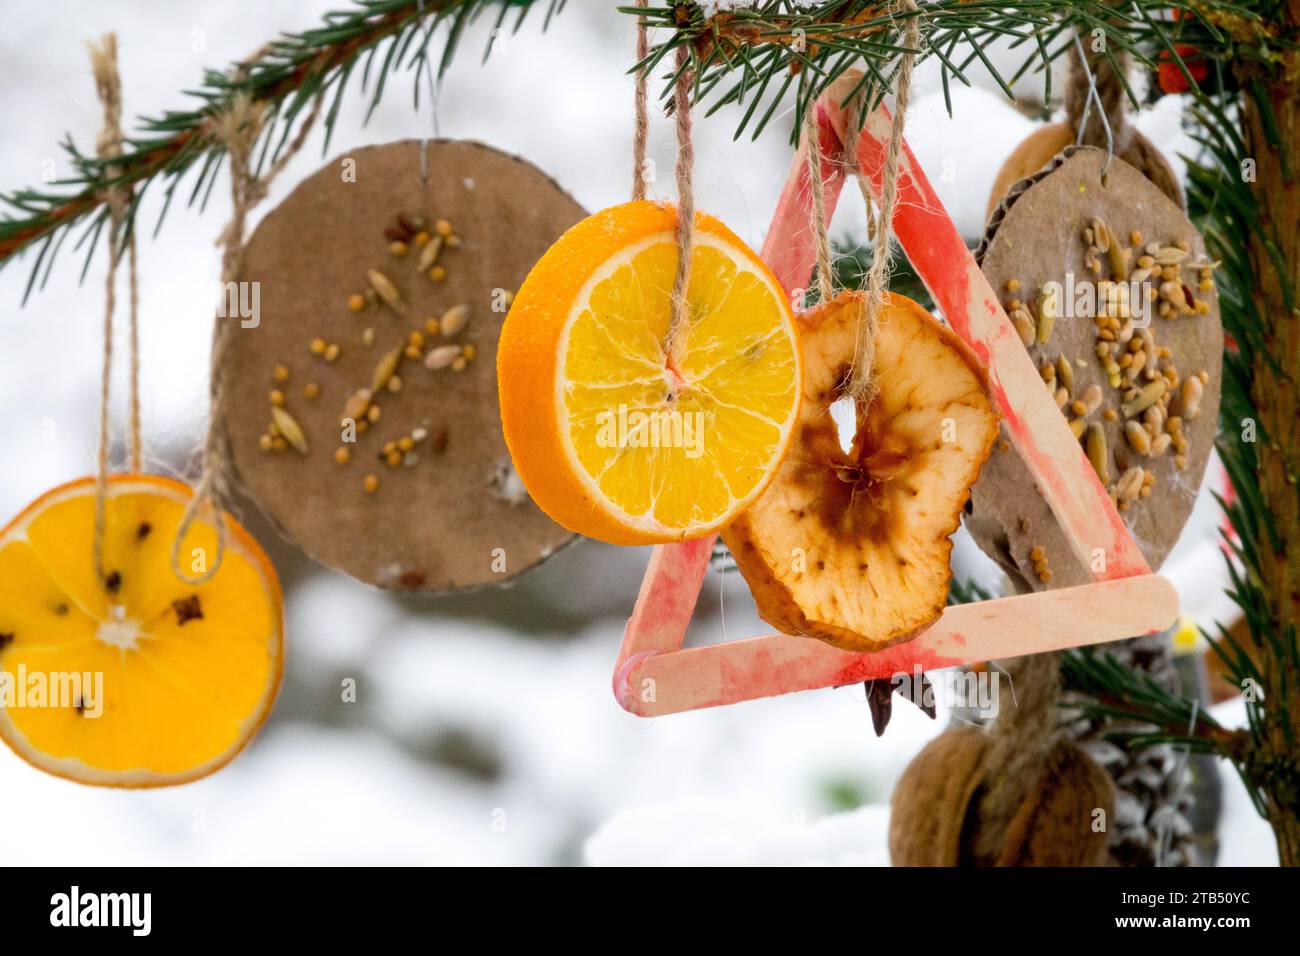 Homemade Christmas decorations hanging on the Christmas tree outside detail Dried, Fruits Stock Photo